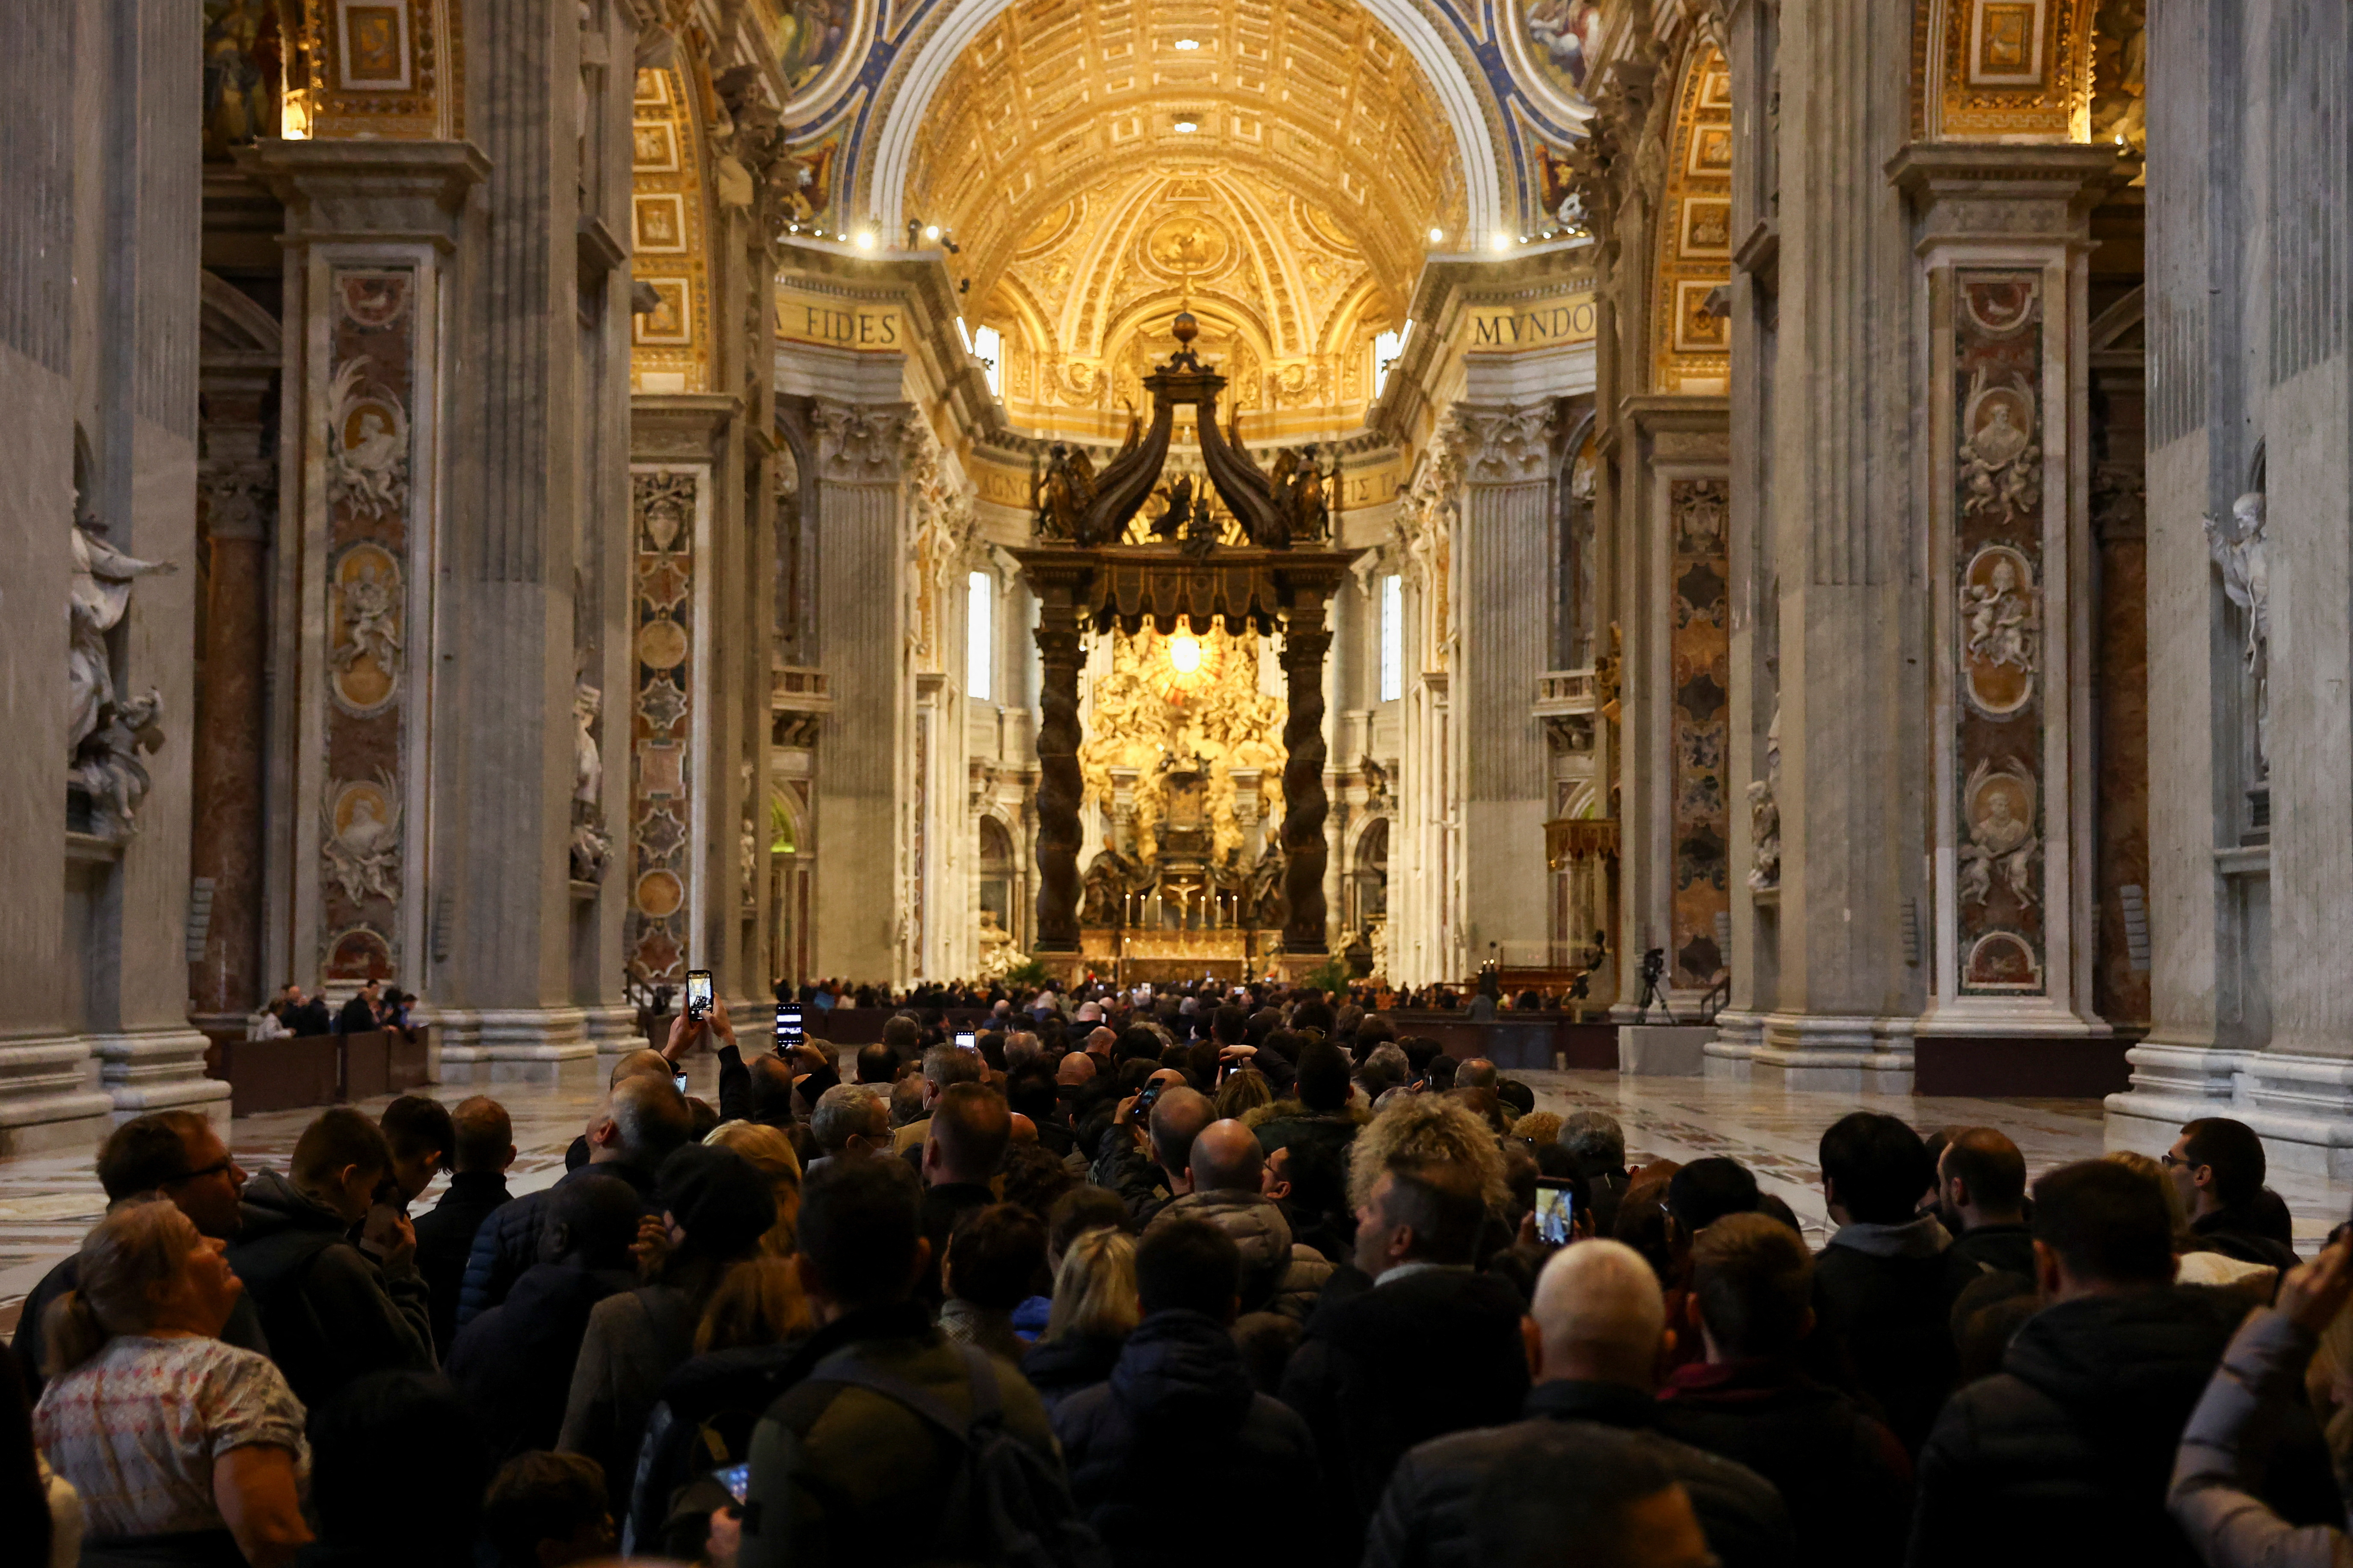 The faithful pay tribute to former Pope Benedict at St. Peter's Basilica in the Vatican.